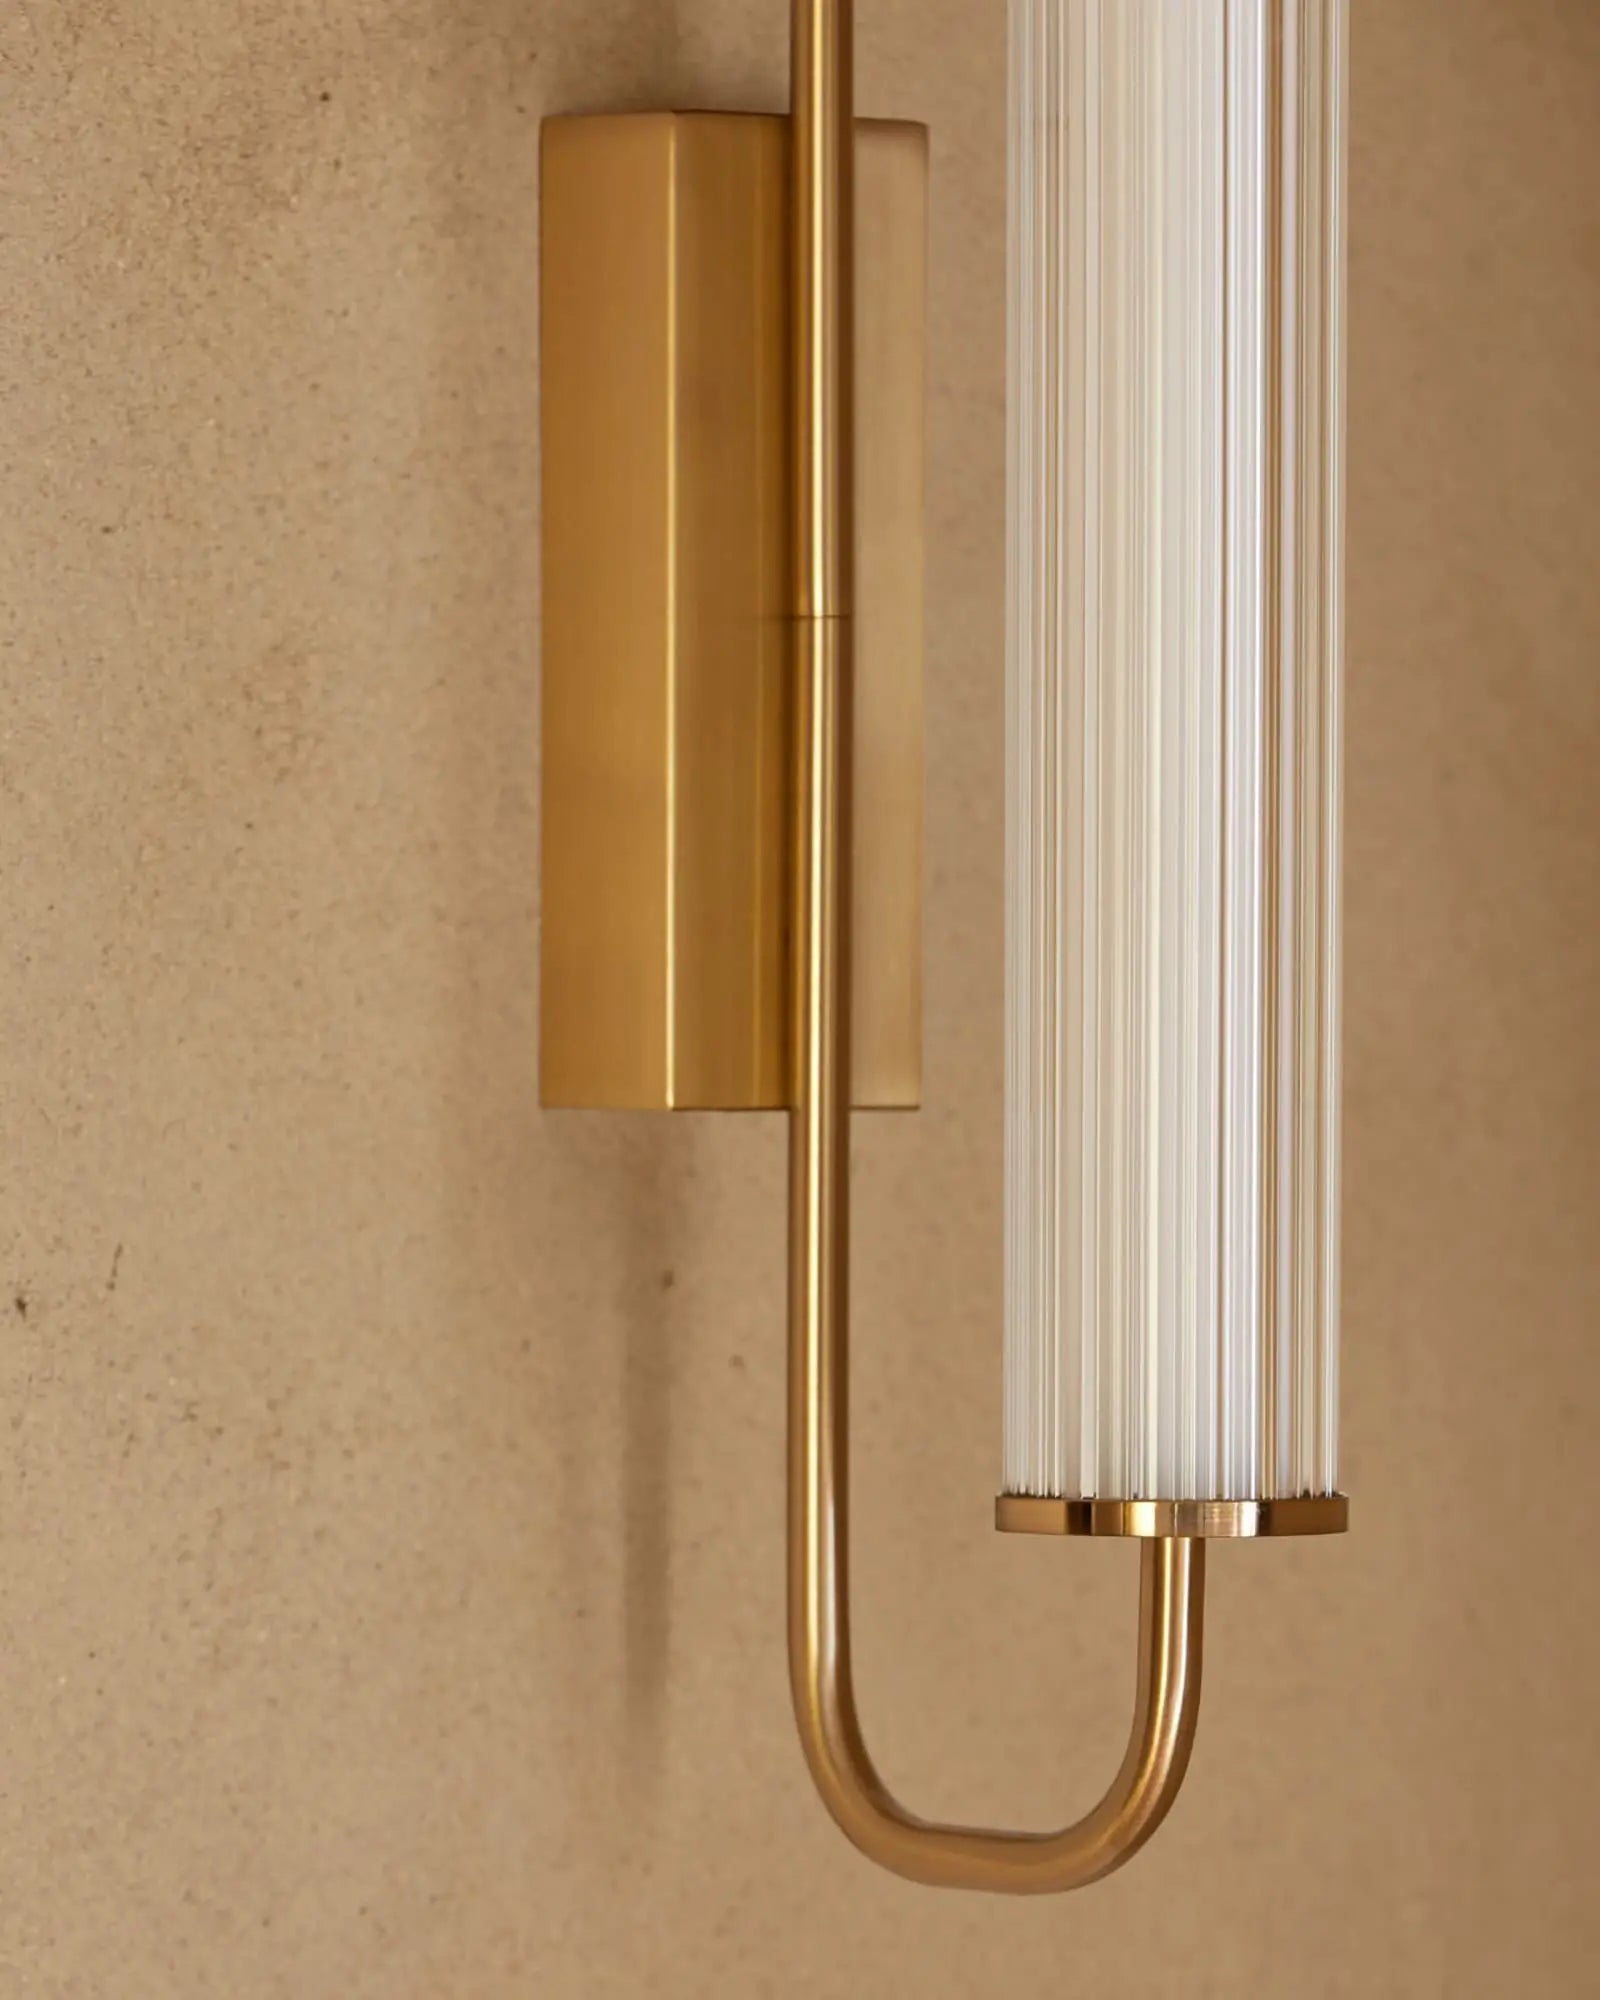 Ison wall light with ribbed glass shade detail